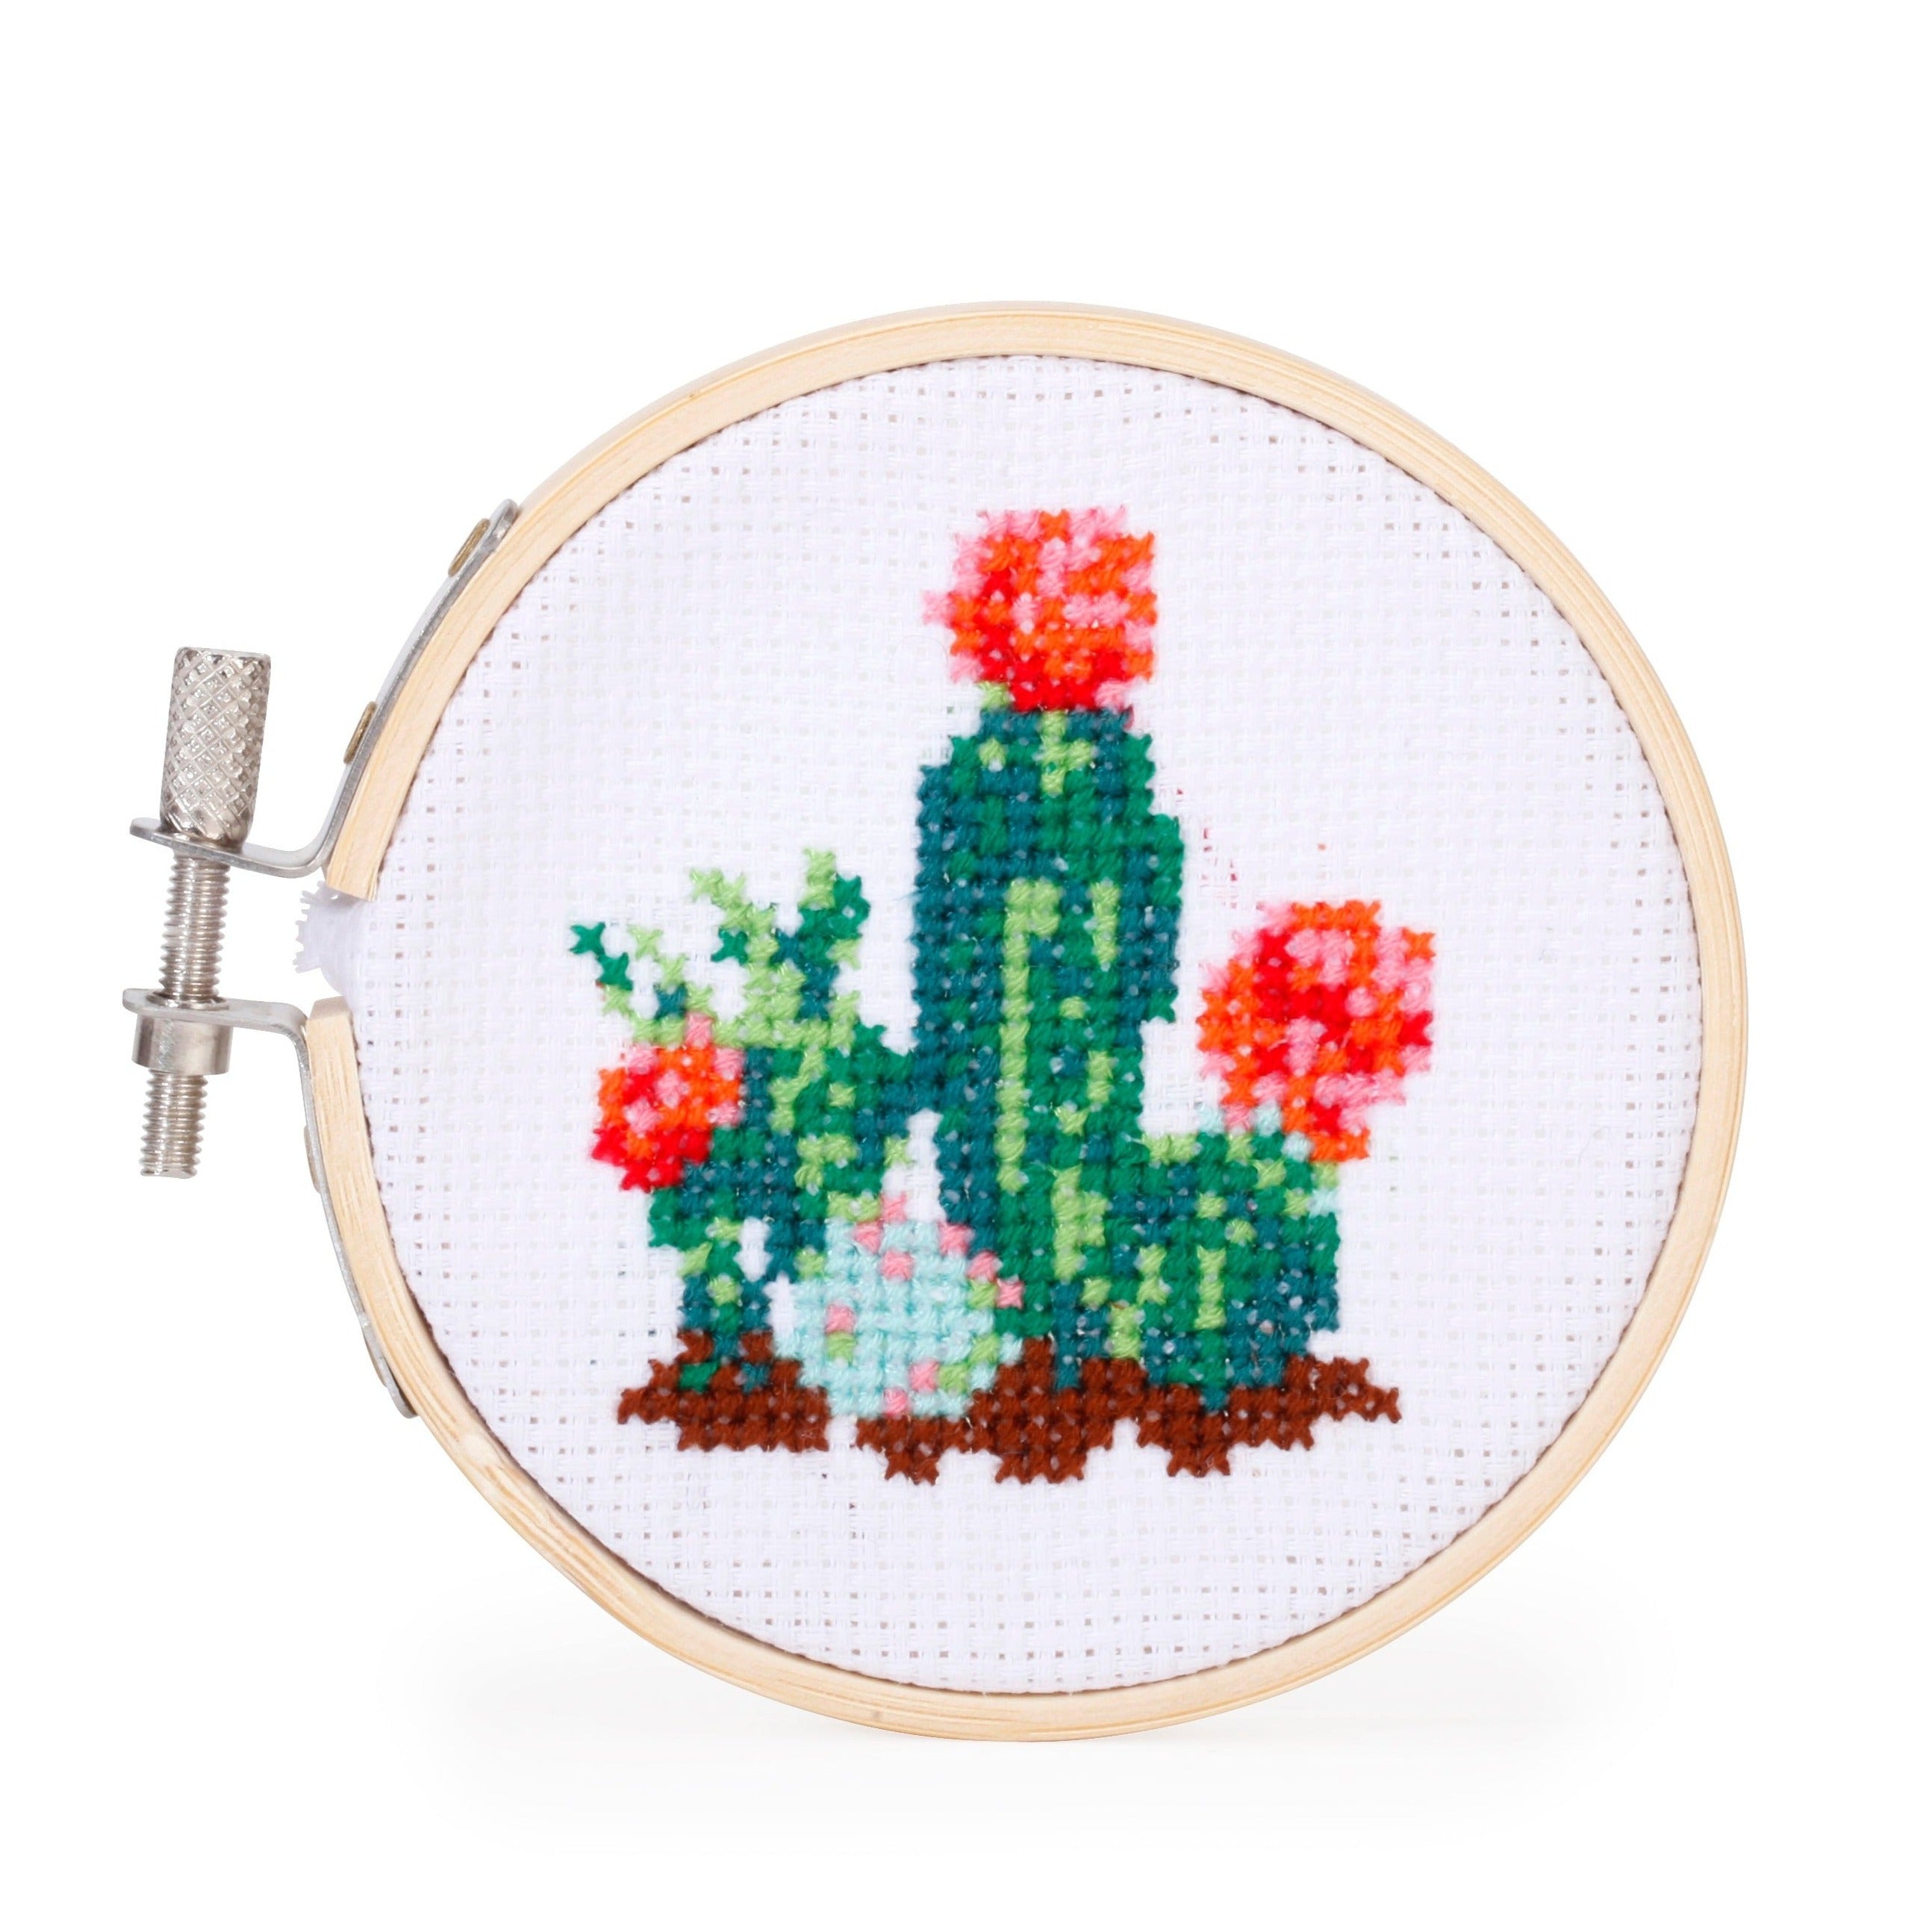 Colorful Feather Embroidery Design – Cactus Embroidery Designs